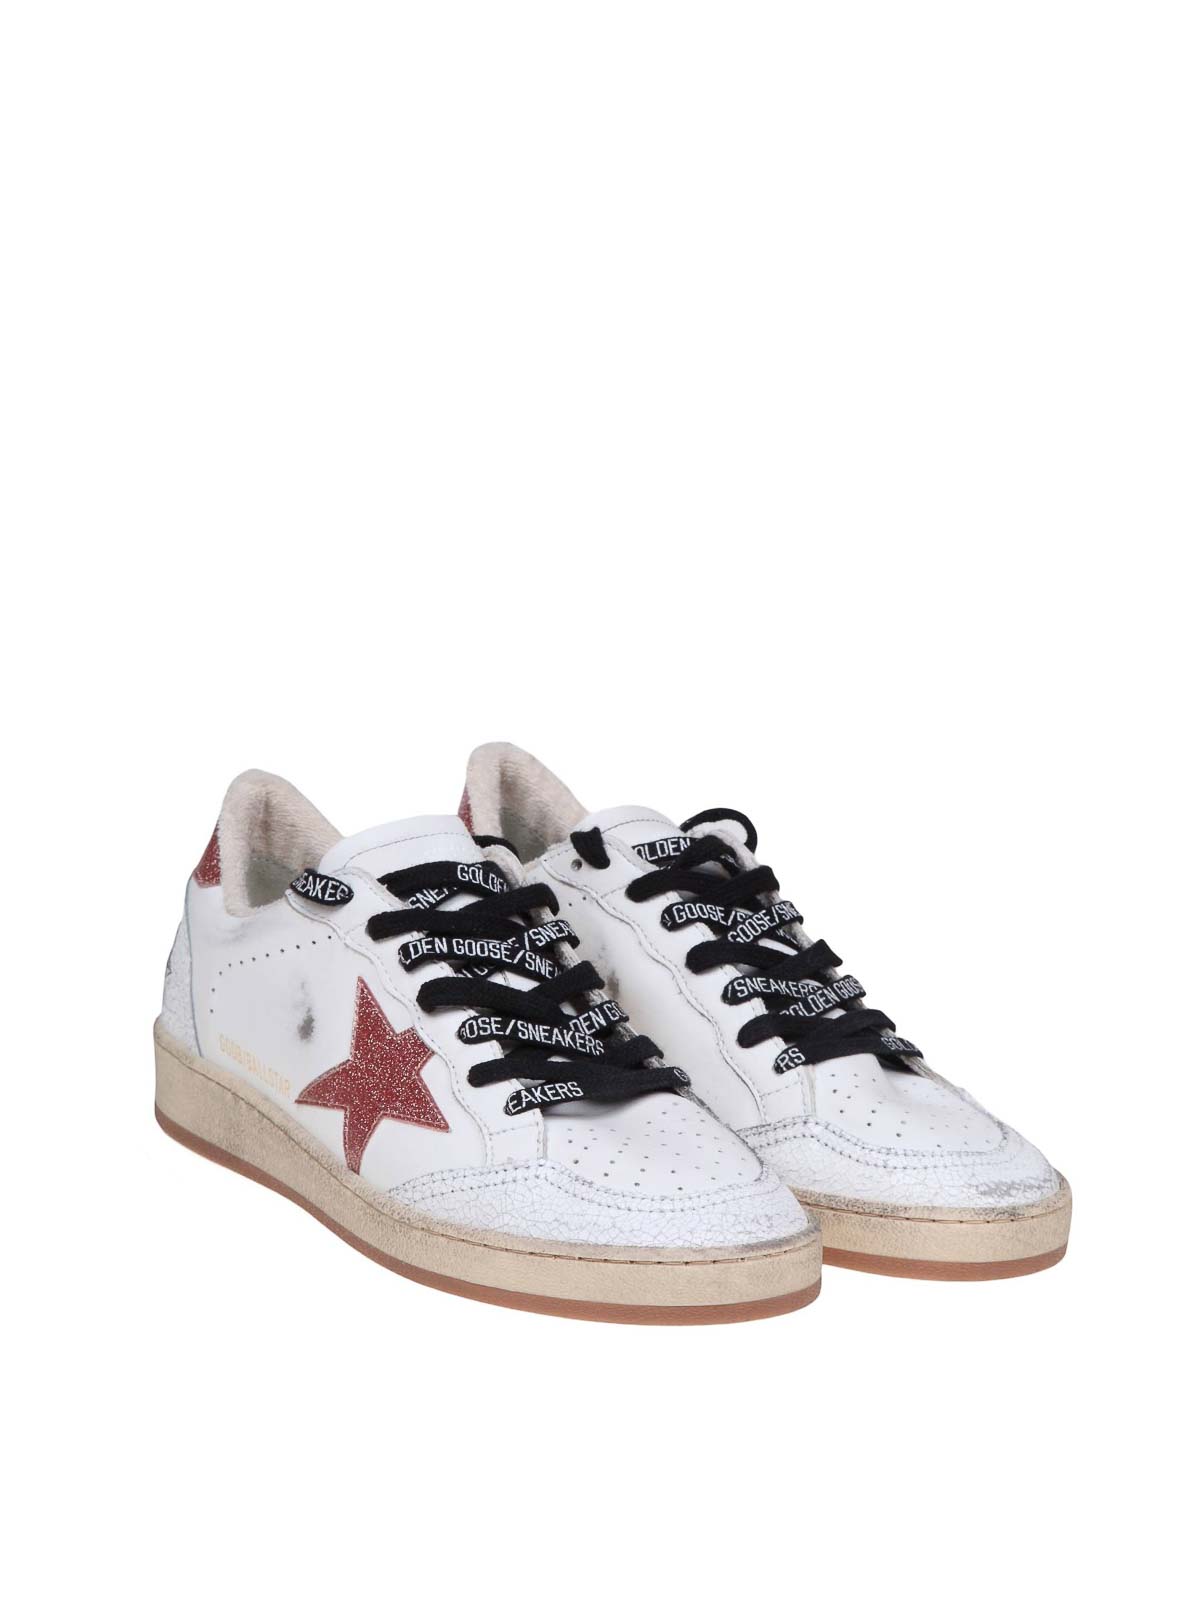 Shop Golden Goose White Sneakers With Glitter Star In Blanco